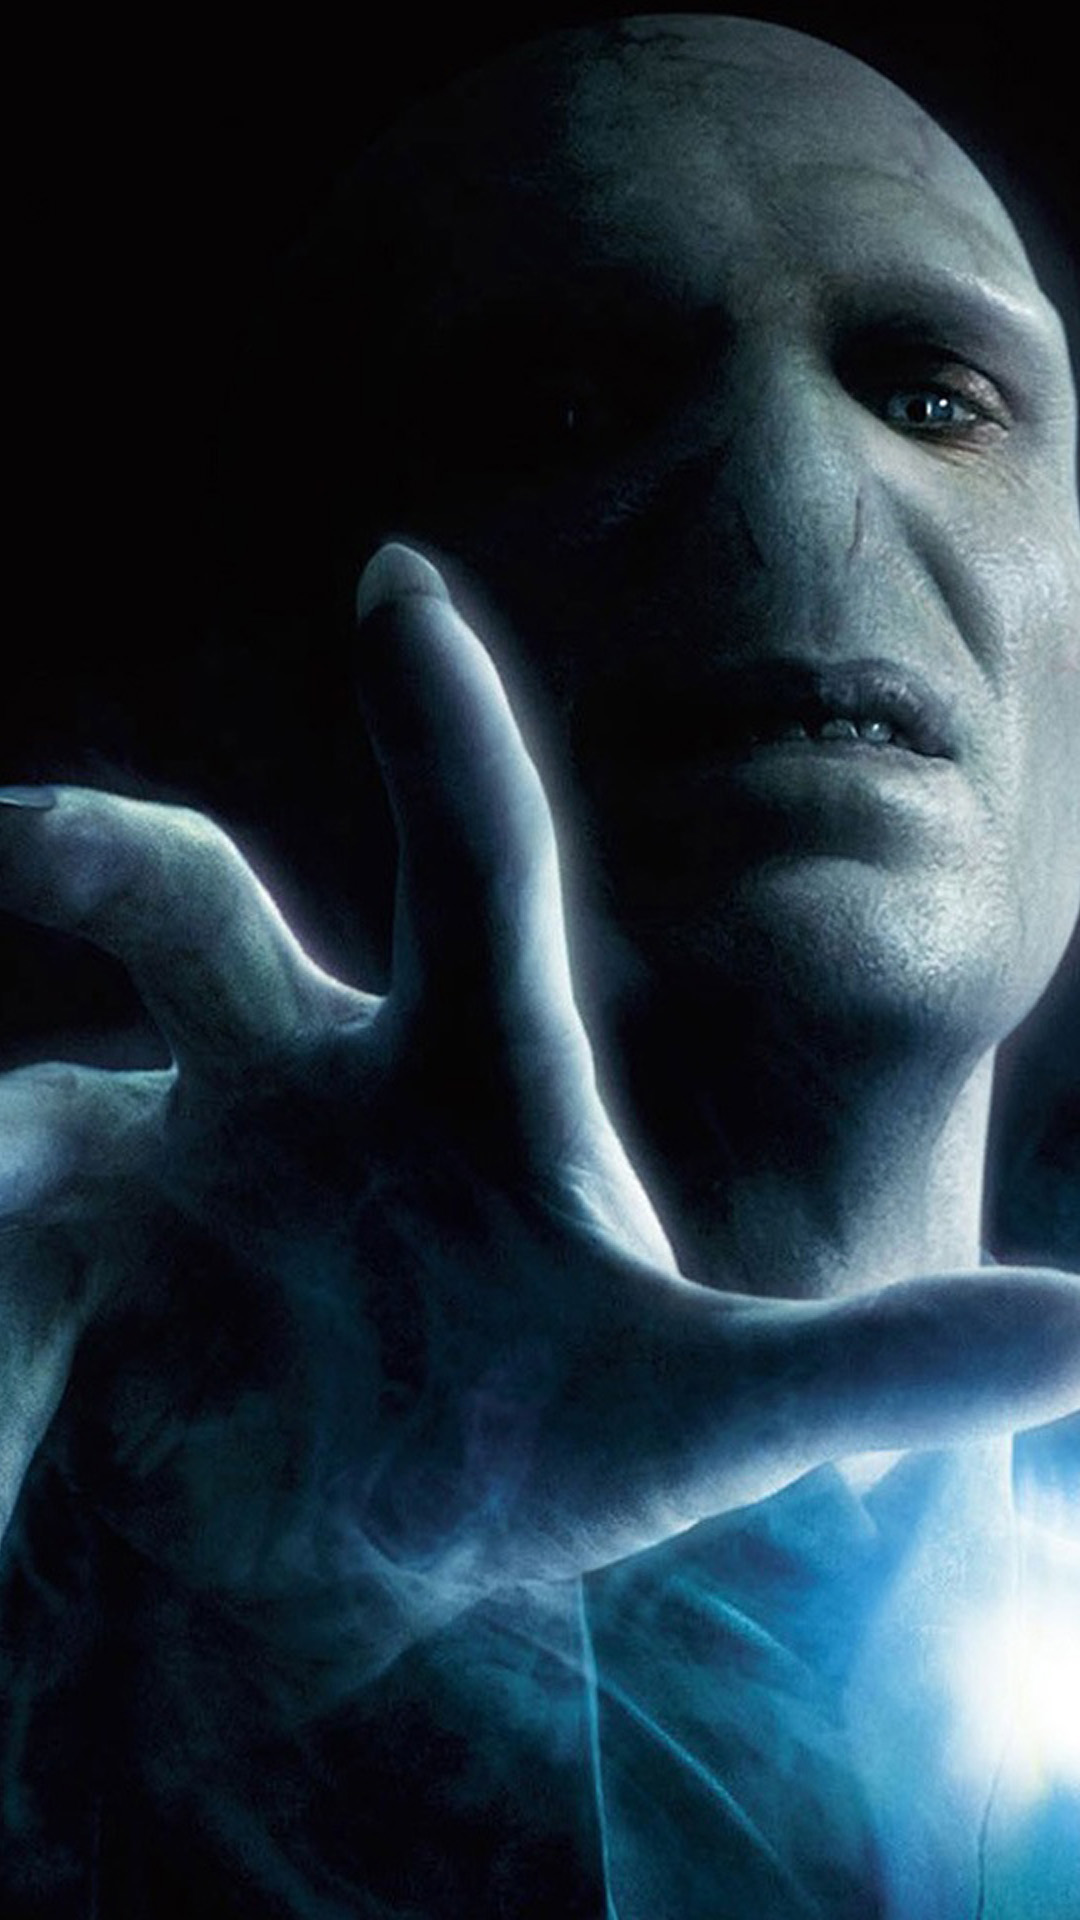 Lord Voldemort Wallpaper For Samsung Galaxy S5